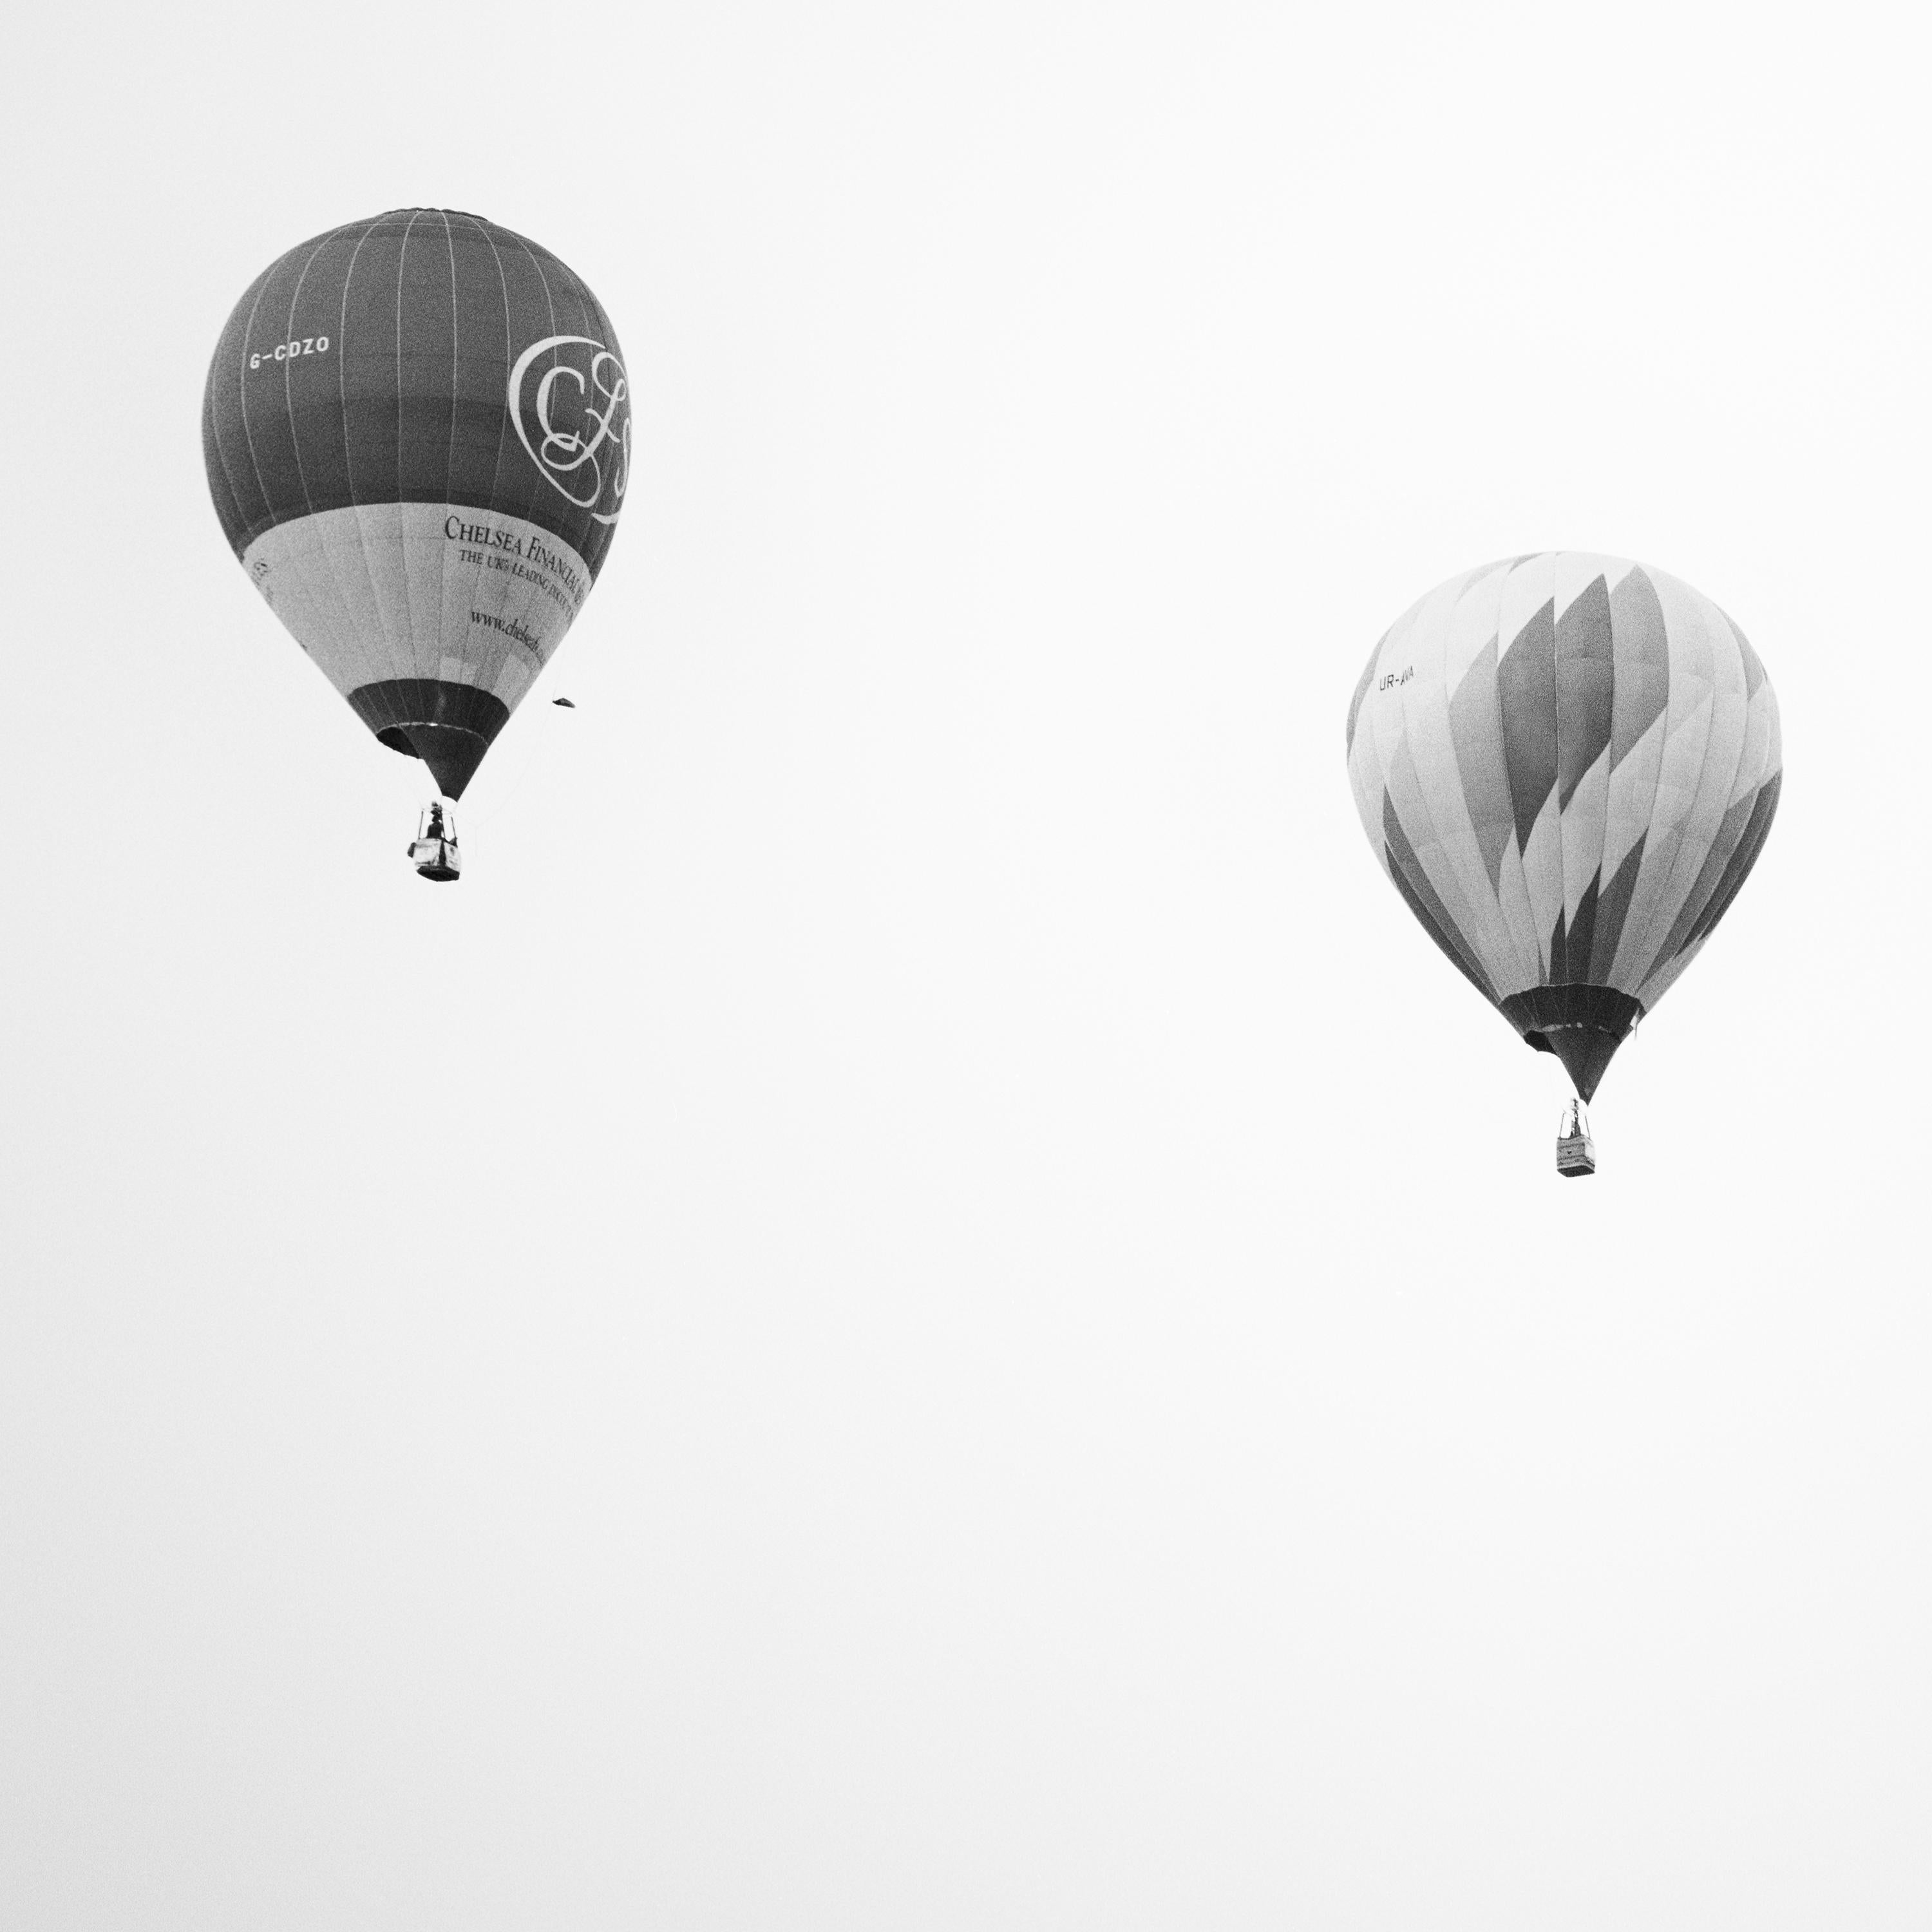 Hot Air Balloon, Championship, minimalist black and white photography, landscape For Sale 3